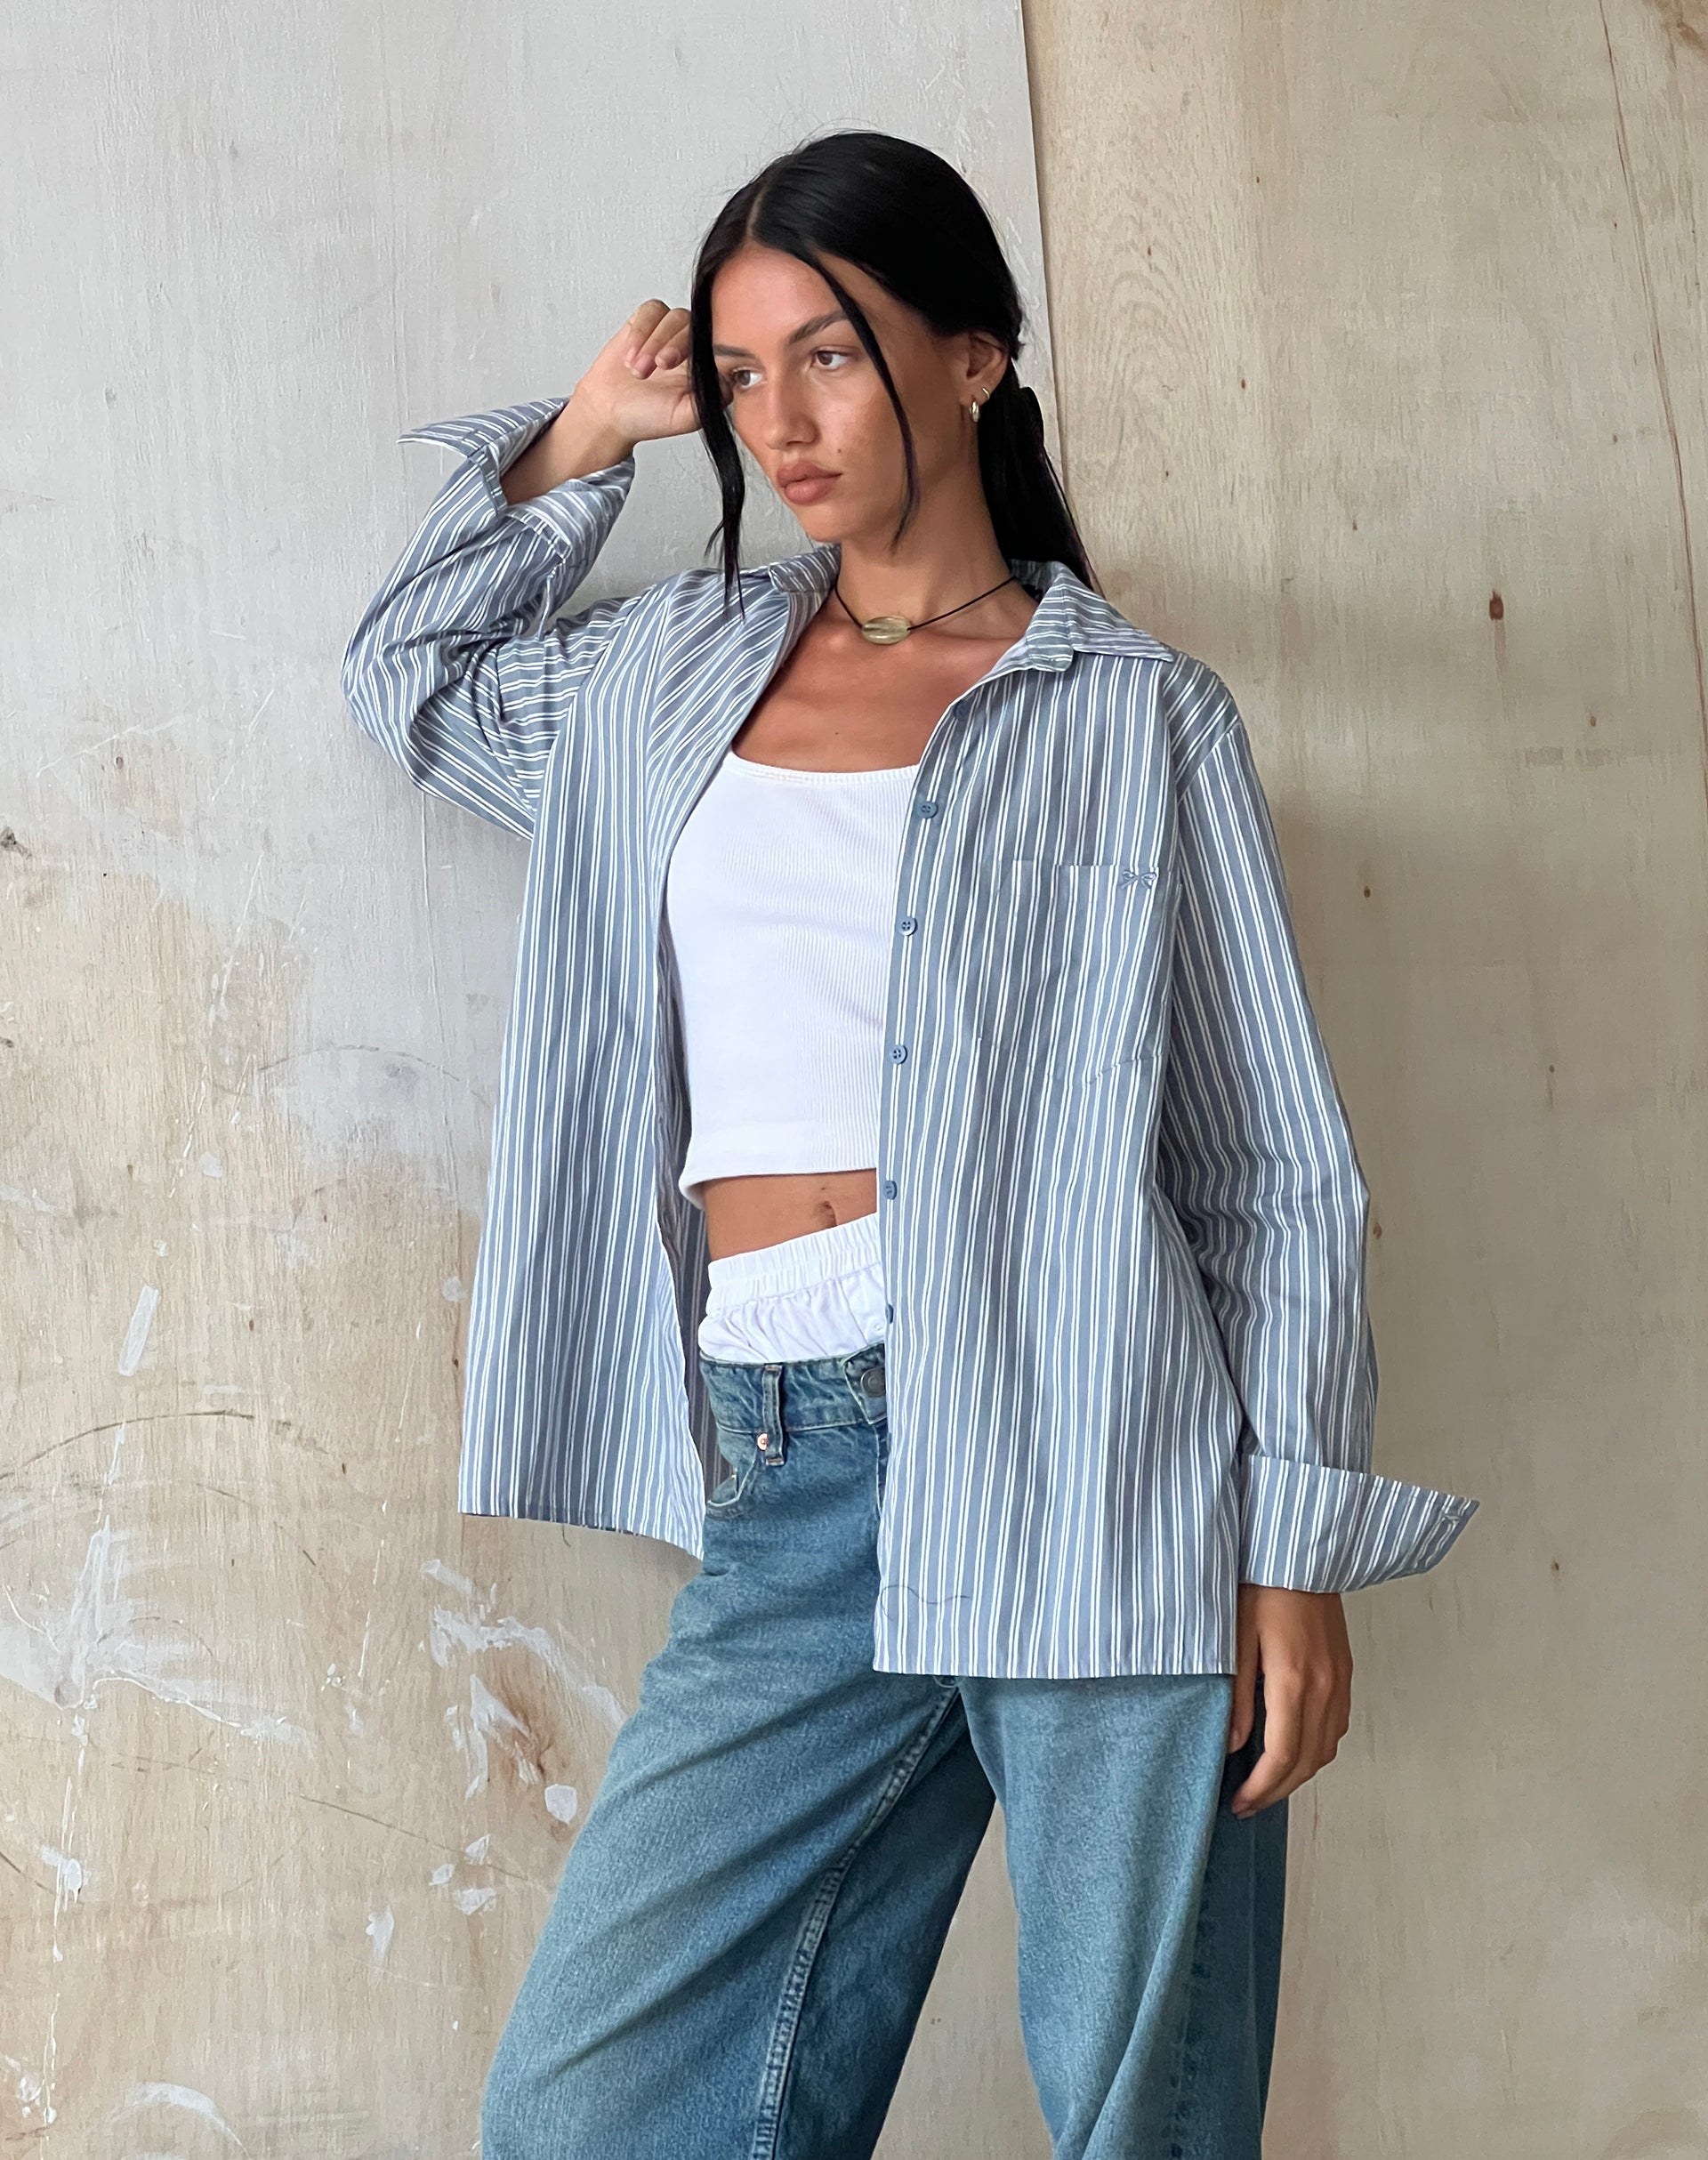 Image of MOTEL X JACQUIE Turner Shirt in Grey and White Stripe with M Embroidery